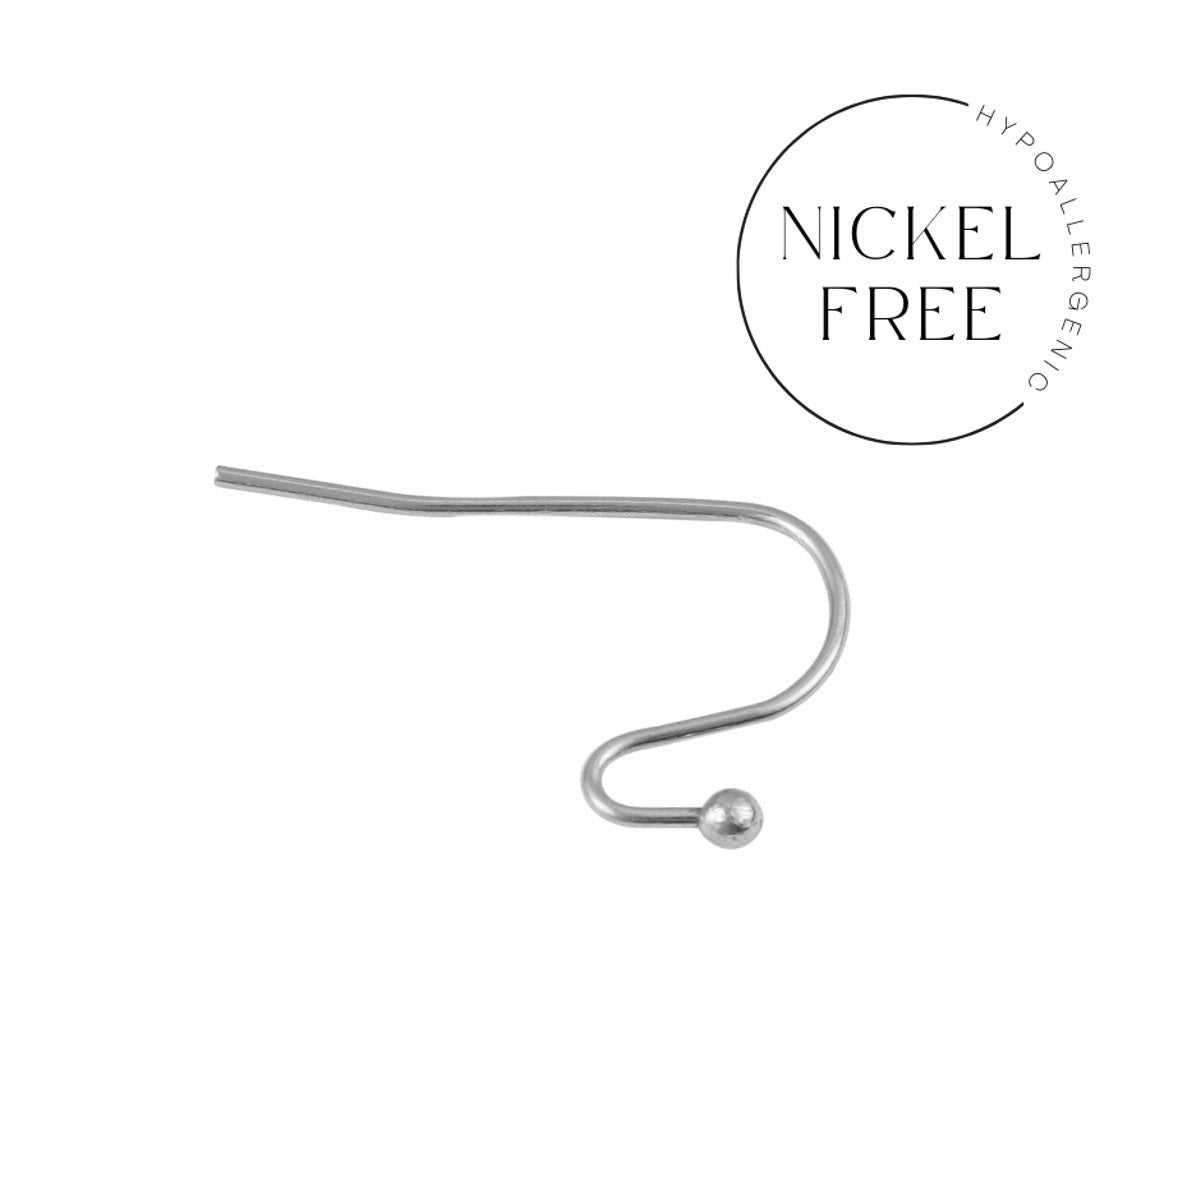 Stainless steel earring hooks 50 pcs (25 pairs) - Nickel free, lead free and cadmium free earwire